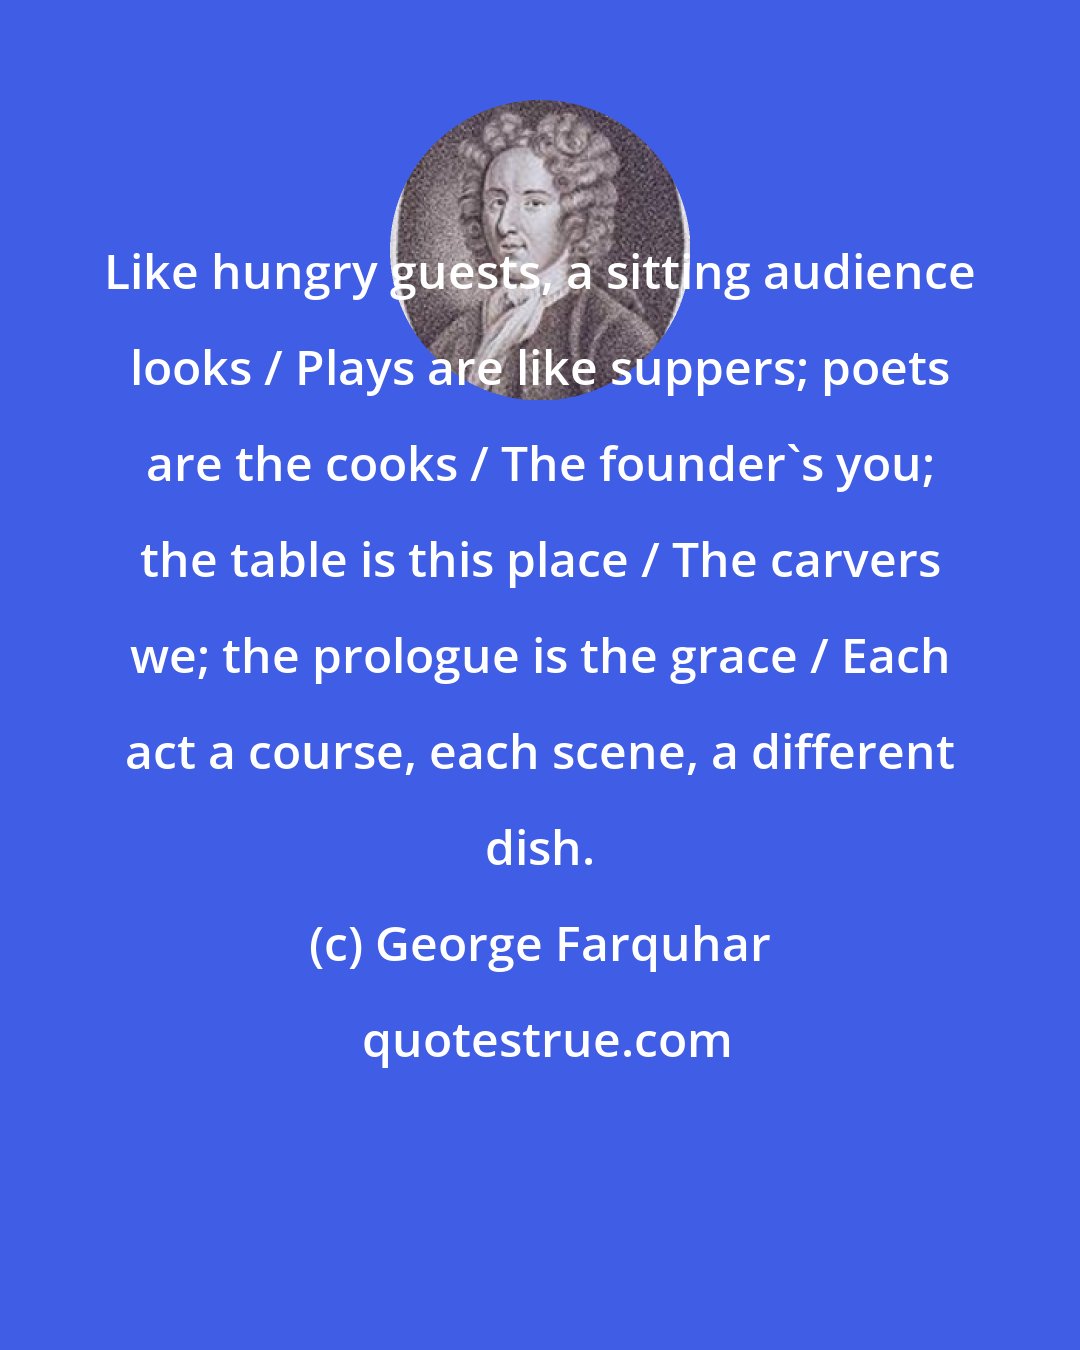 George Farquhar: Like hungry guests, a sitting audience looks / Plays are like suppers; poets are the cooks / The founder's you; the table is this place / The carvers we; the prologue is the grace / Each act a course, each scene, a different dish.